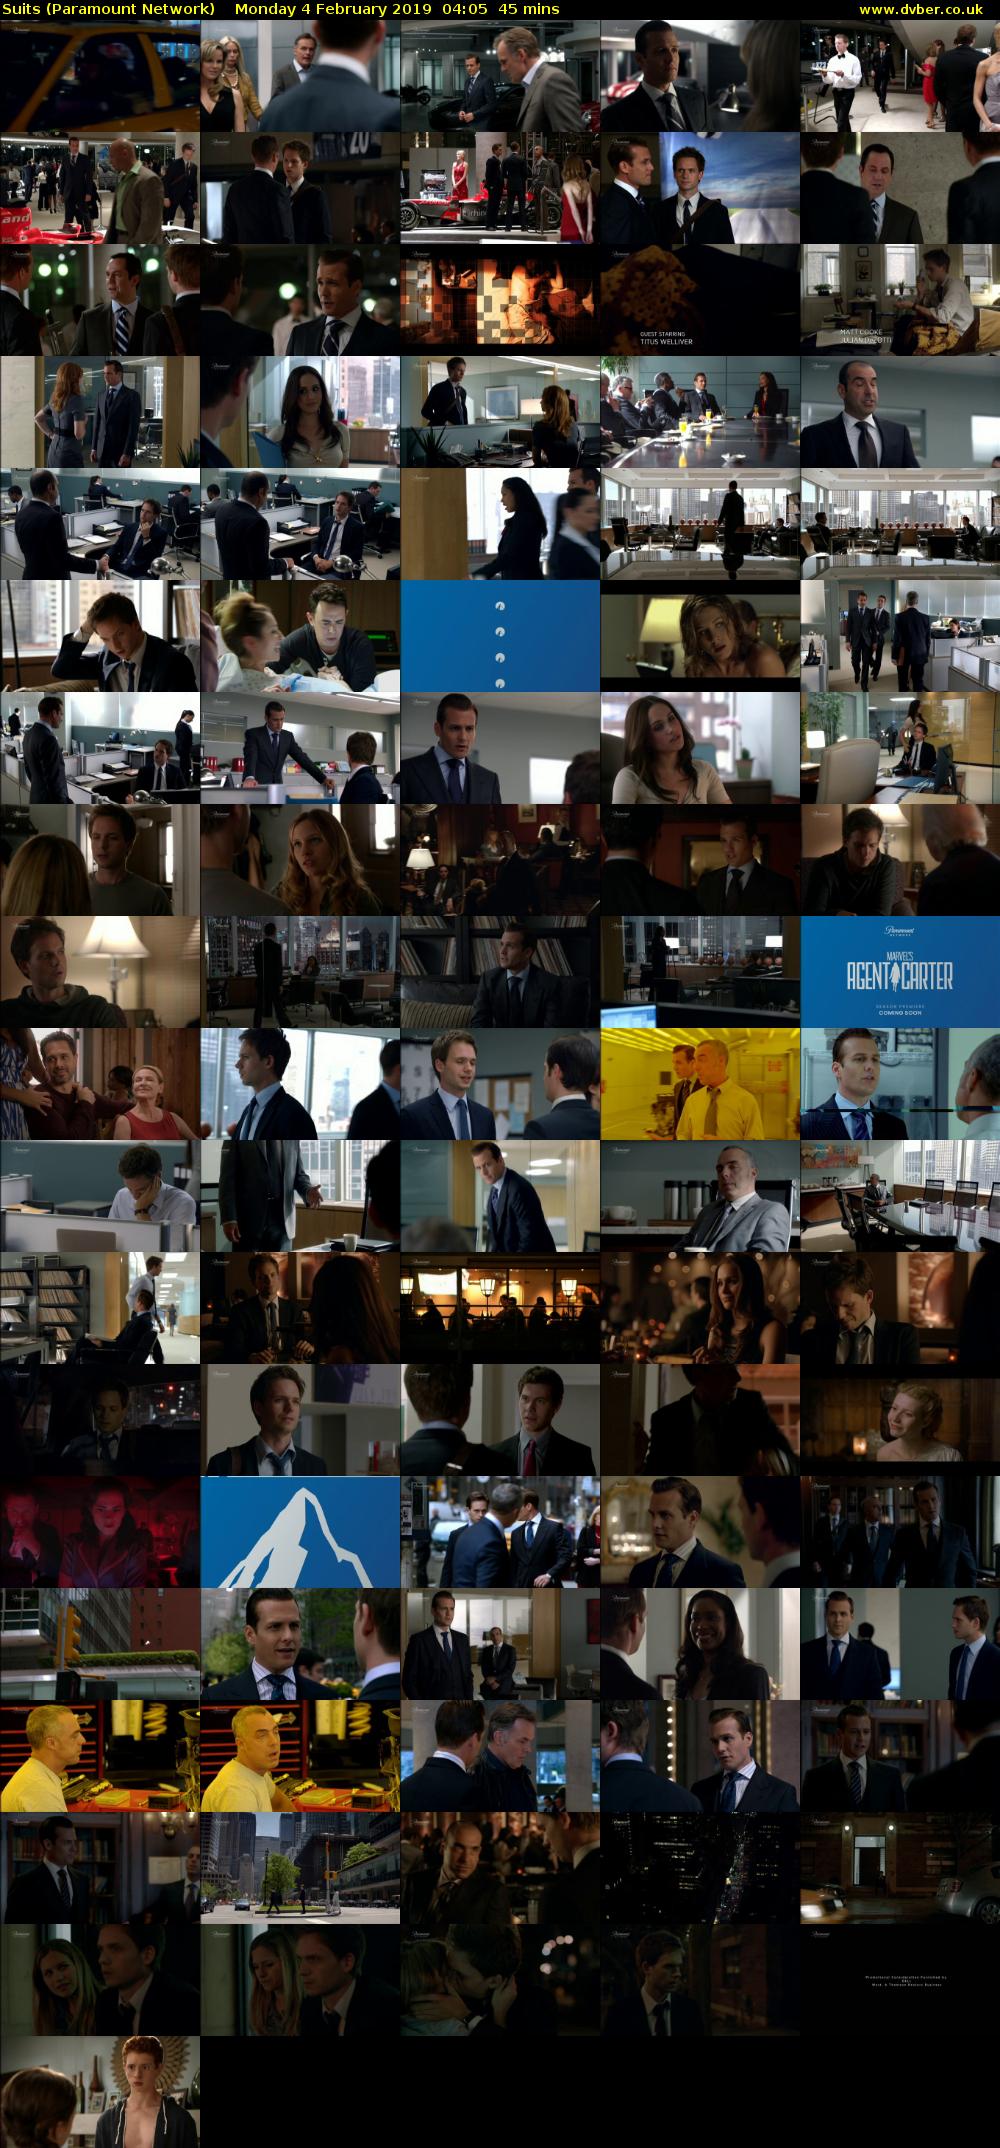 Suits (Paramount Network) Monday 4 February 2019 04:05 - 04:50